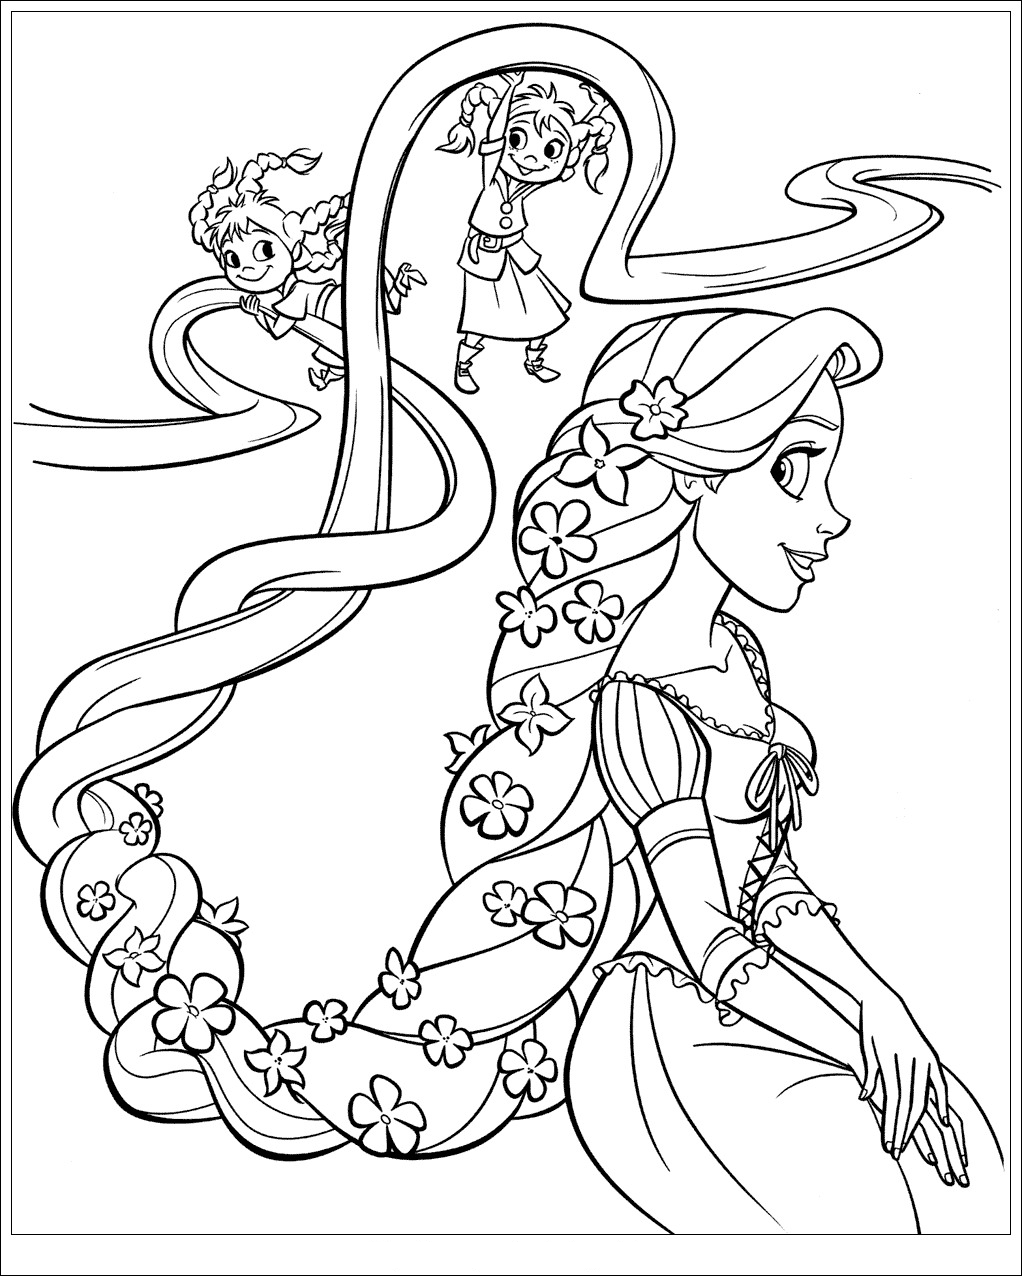 Tangled free to color for children - Tangled Kids Coloring Pages